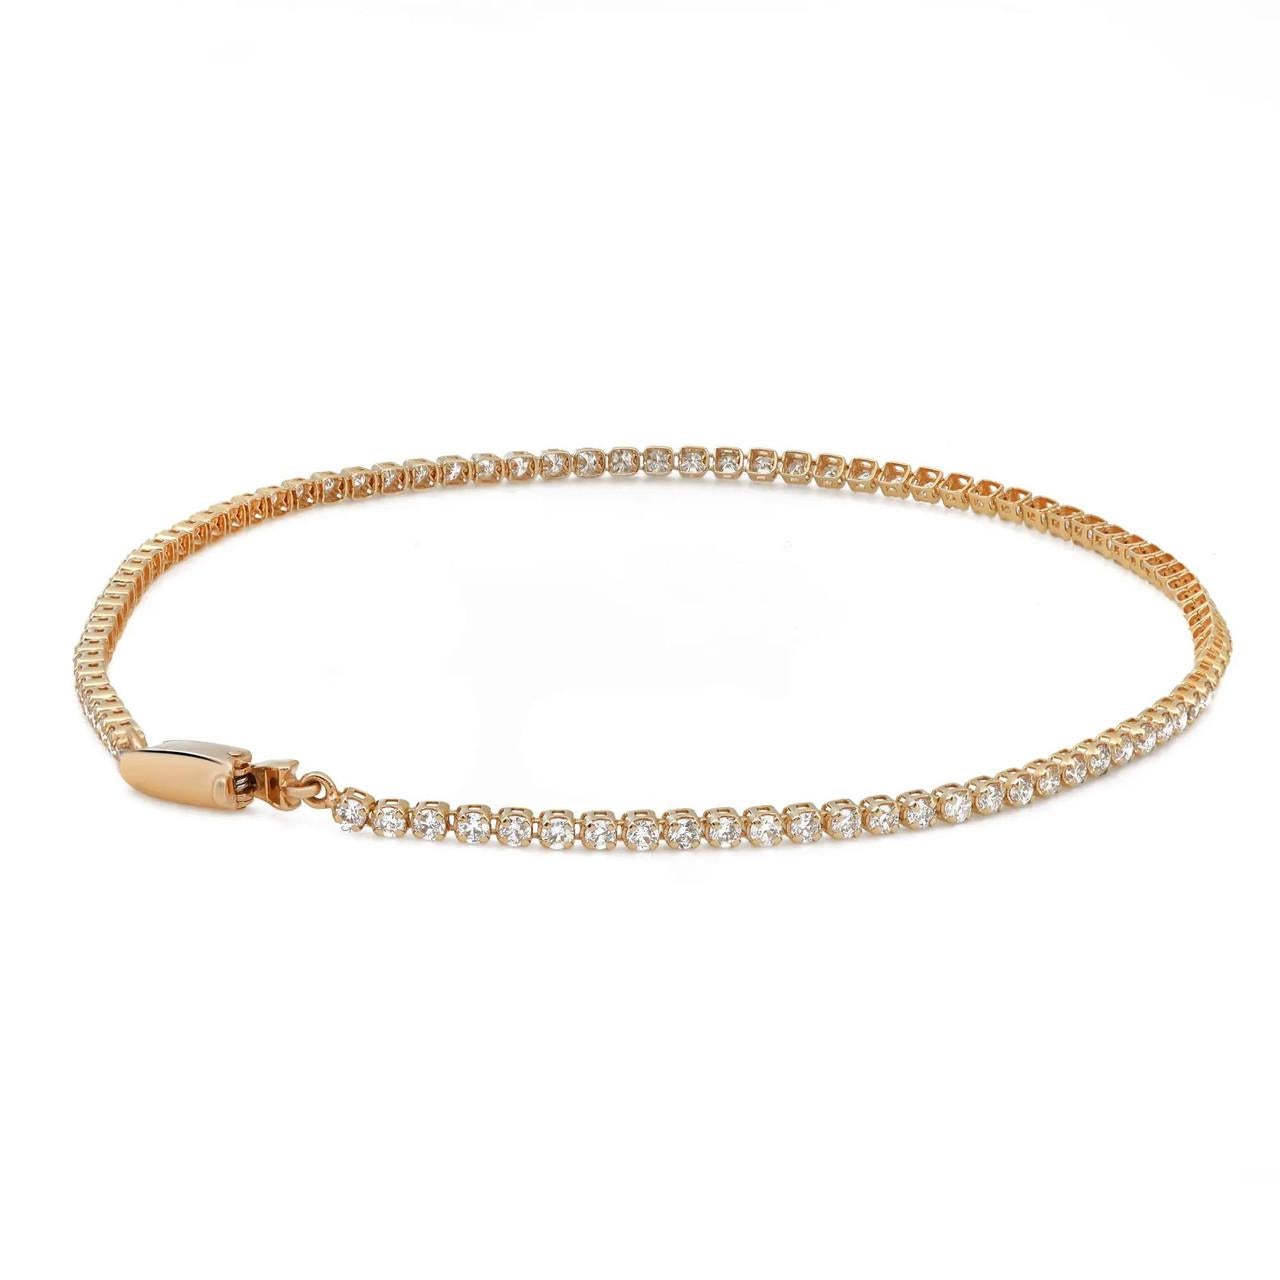 Enhance your jewelry collection with this exquisitely crafted petite tennis bracelet. Meticulously designed in 14k yellow gold, it showcases round brilliant cut diamonds in a prong setting, totaling 0.99 carats. The bracelet emanates timeless